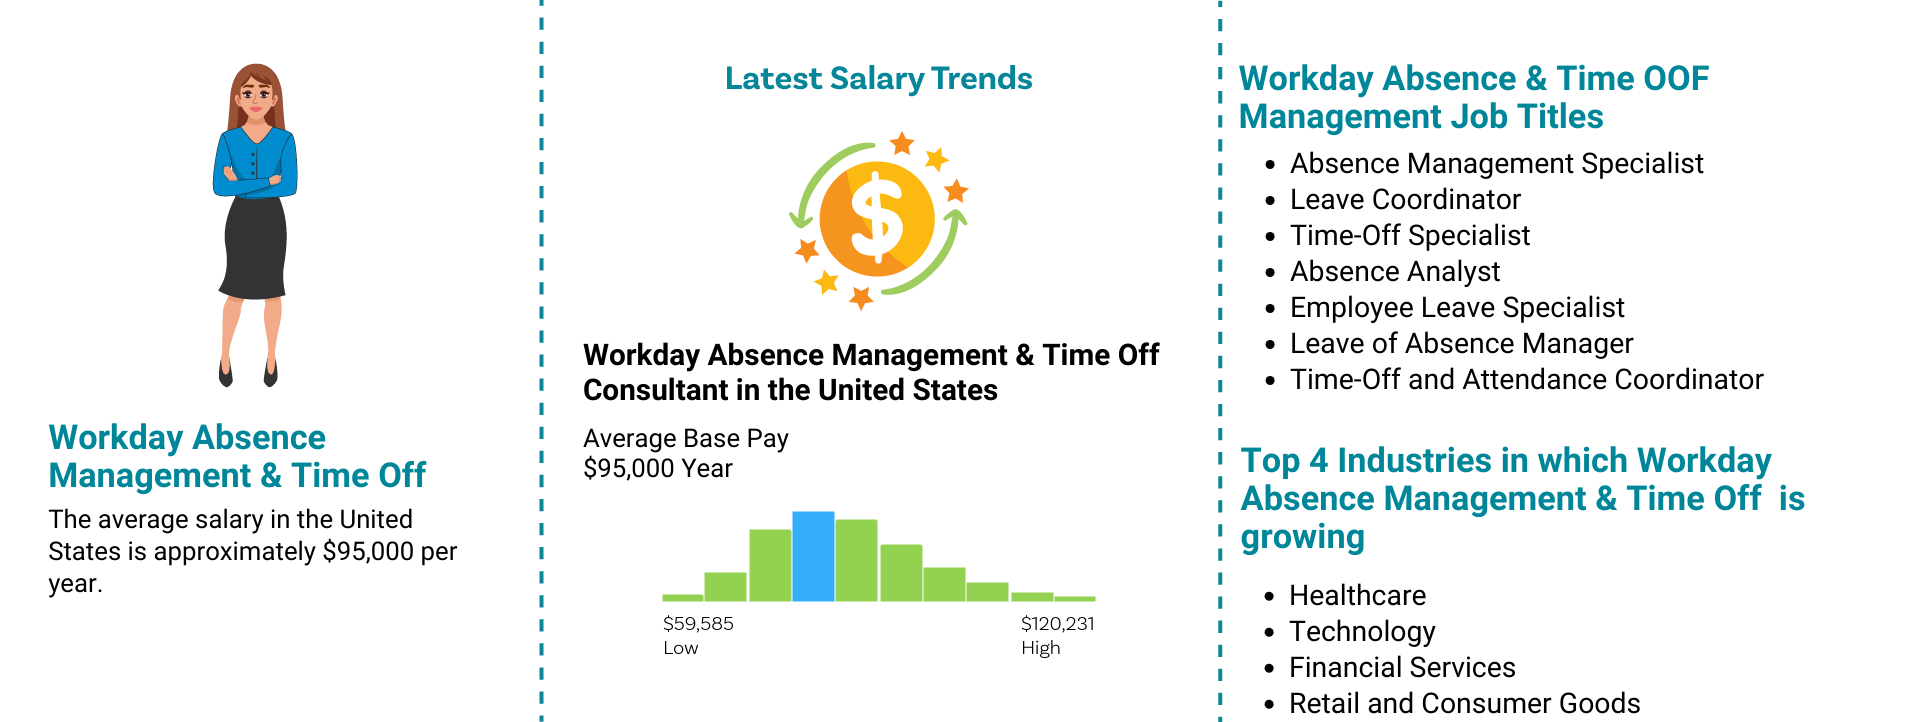 Workday Absence Management Job Outlook